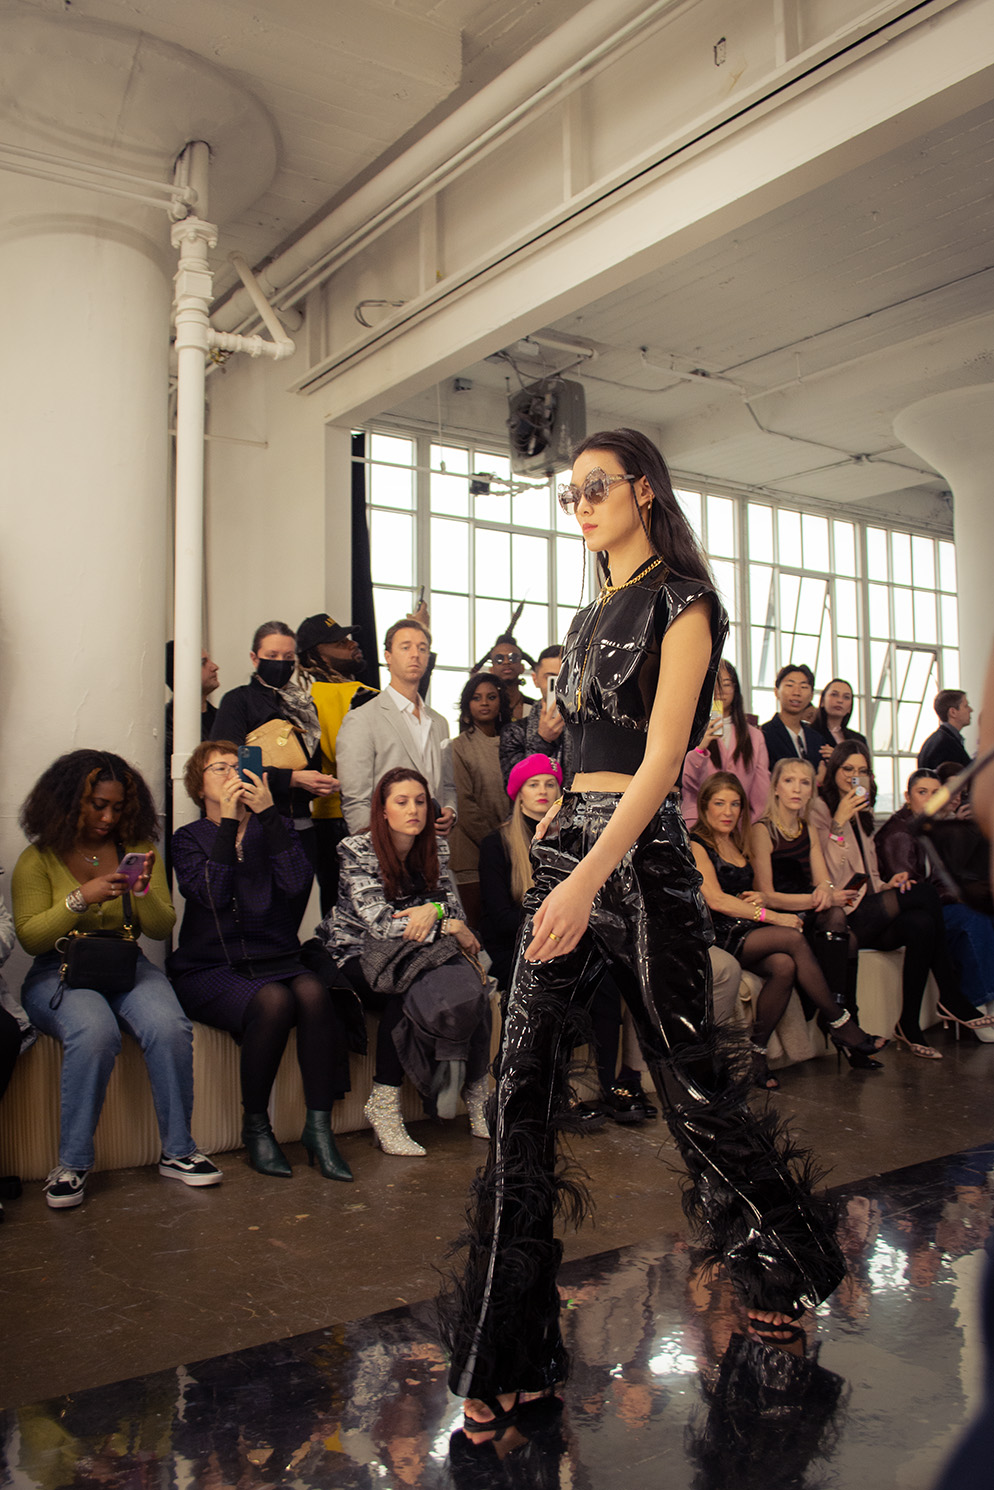 A woman with sunglasses and black, shiny patent leather or vinyl clothing walks forward, with a crowd behind her.